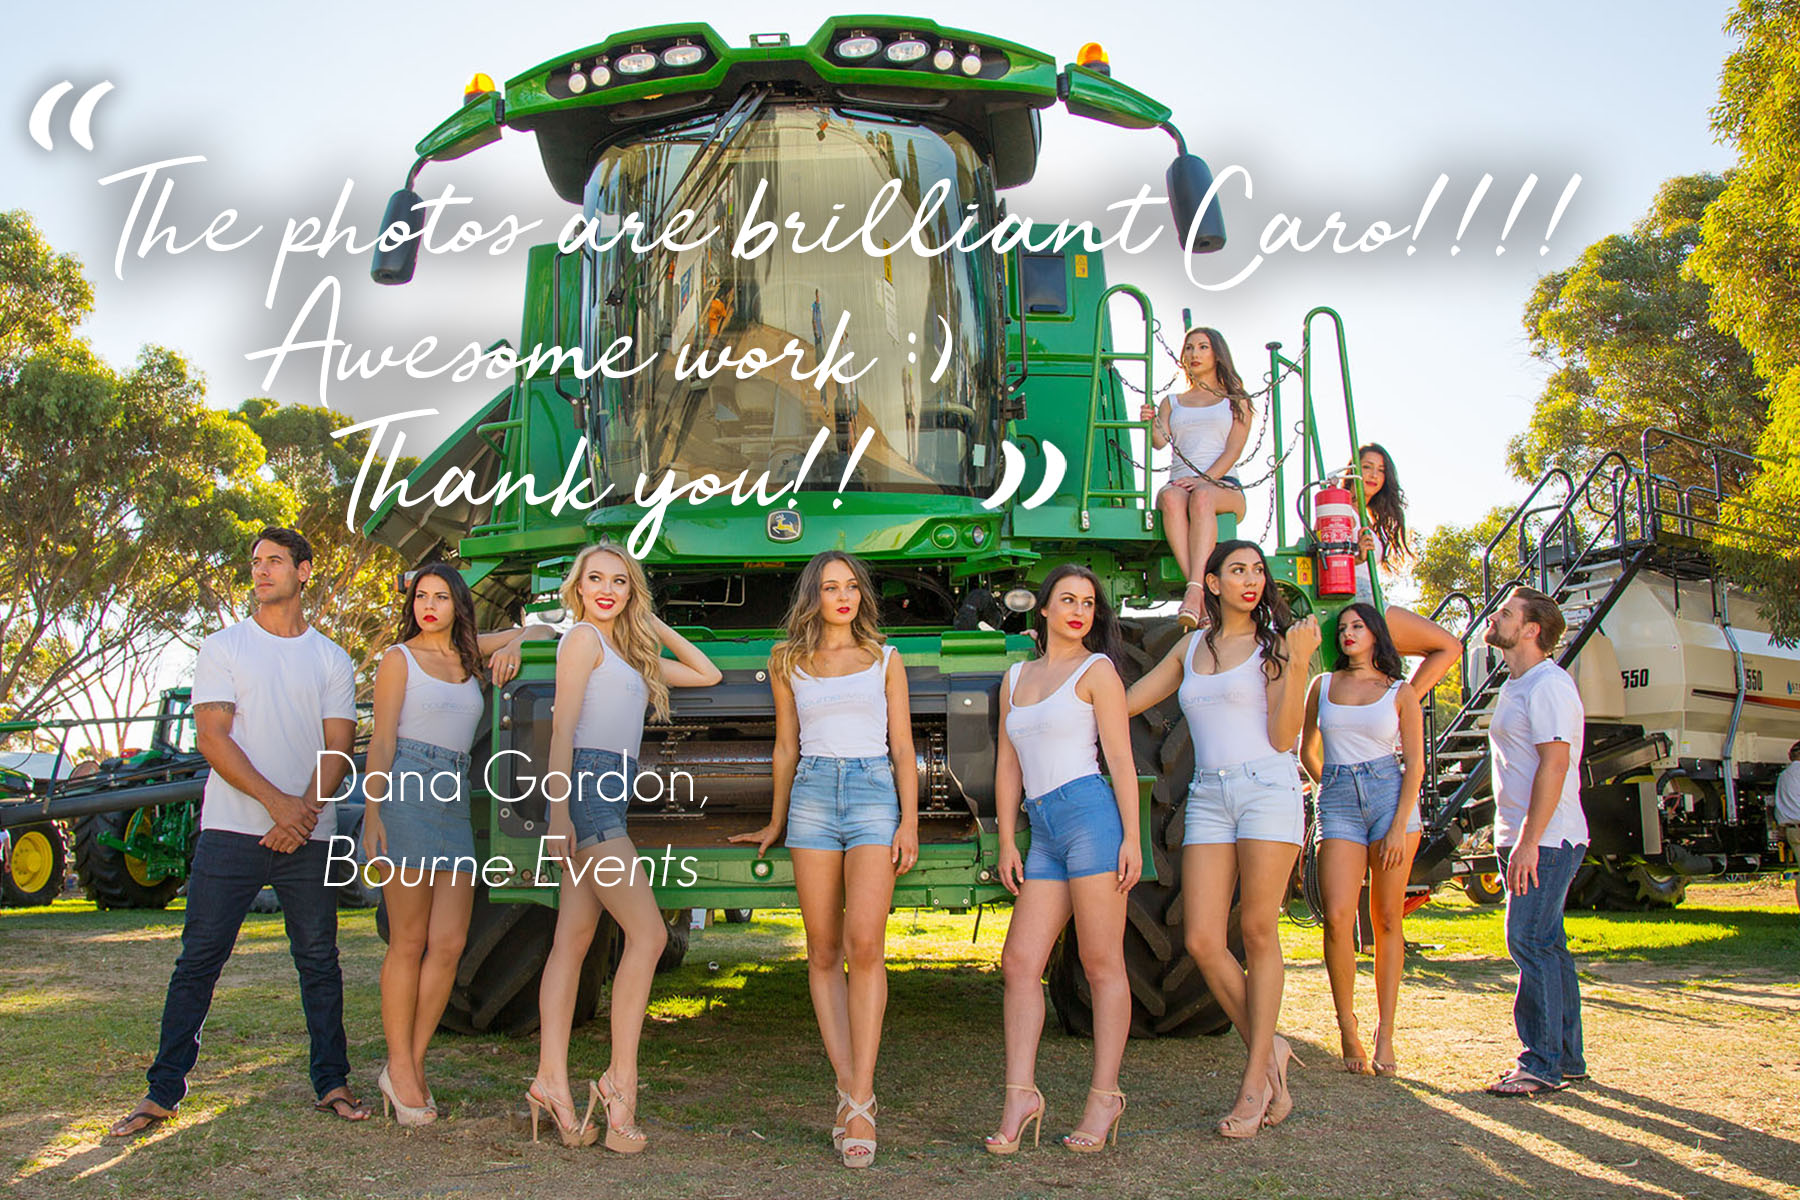 Image of models in front of John Deere Harvester with quote "The photos are brilliant Caro!!!! Awesome work :)  Thank you!!" from Dana Gordon of Bourne Events.